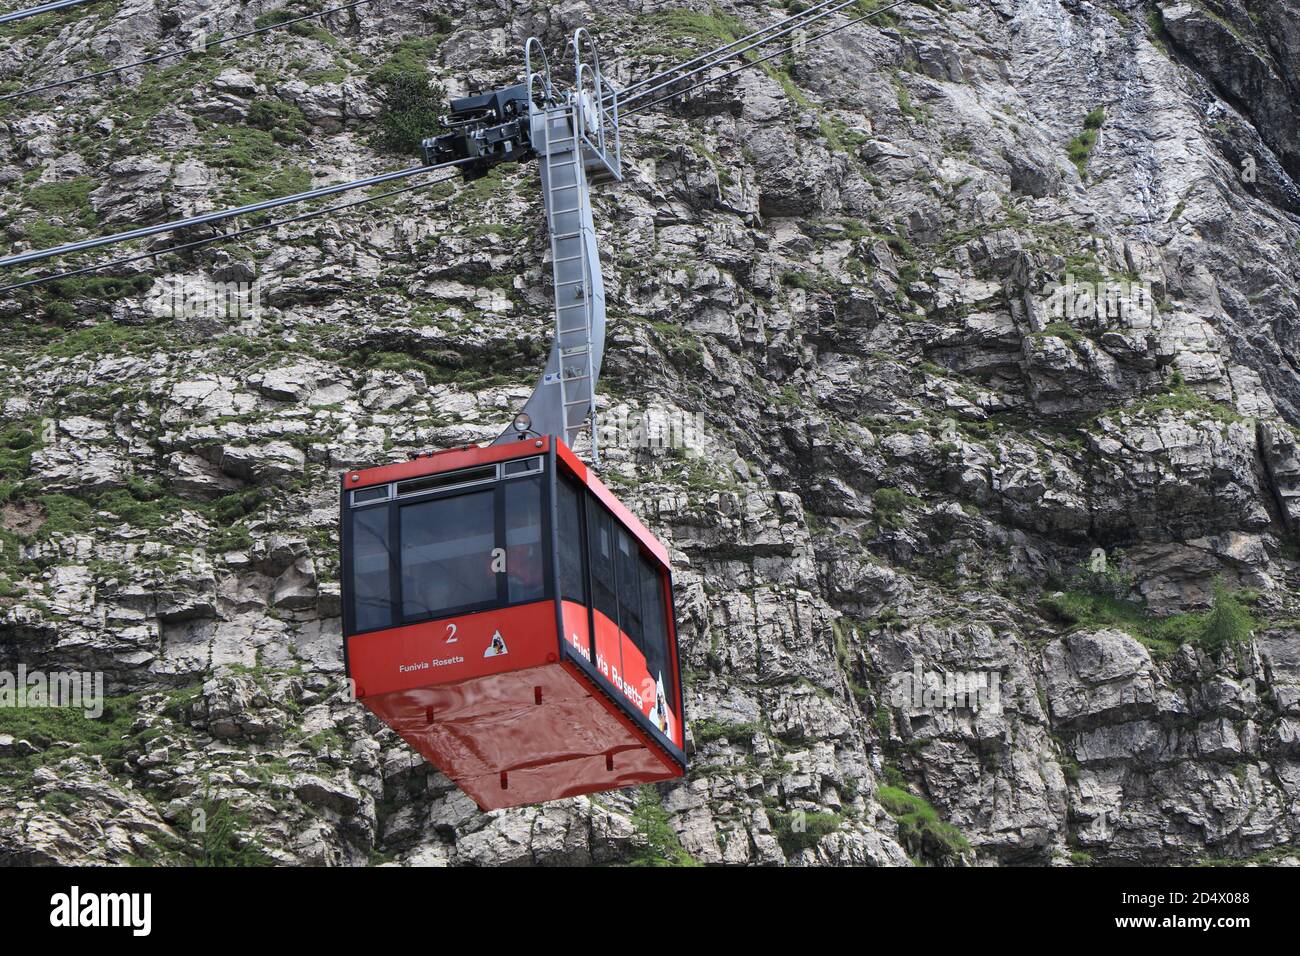 A cable car coming down the mountain. High quality photo of a funicular railway Stock Photo